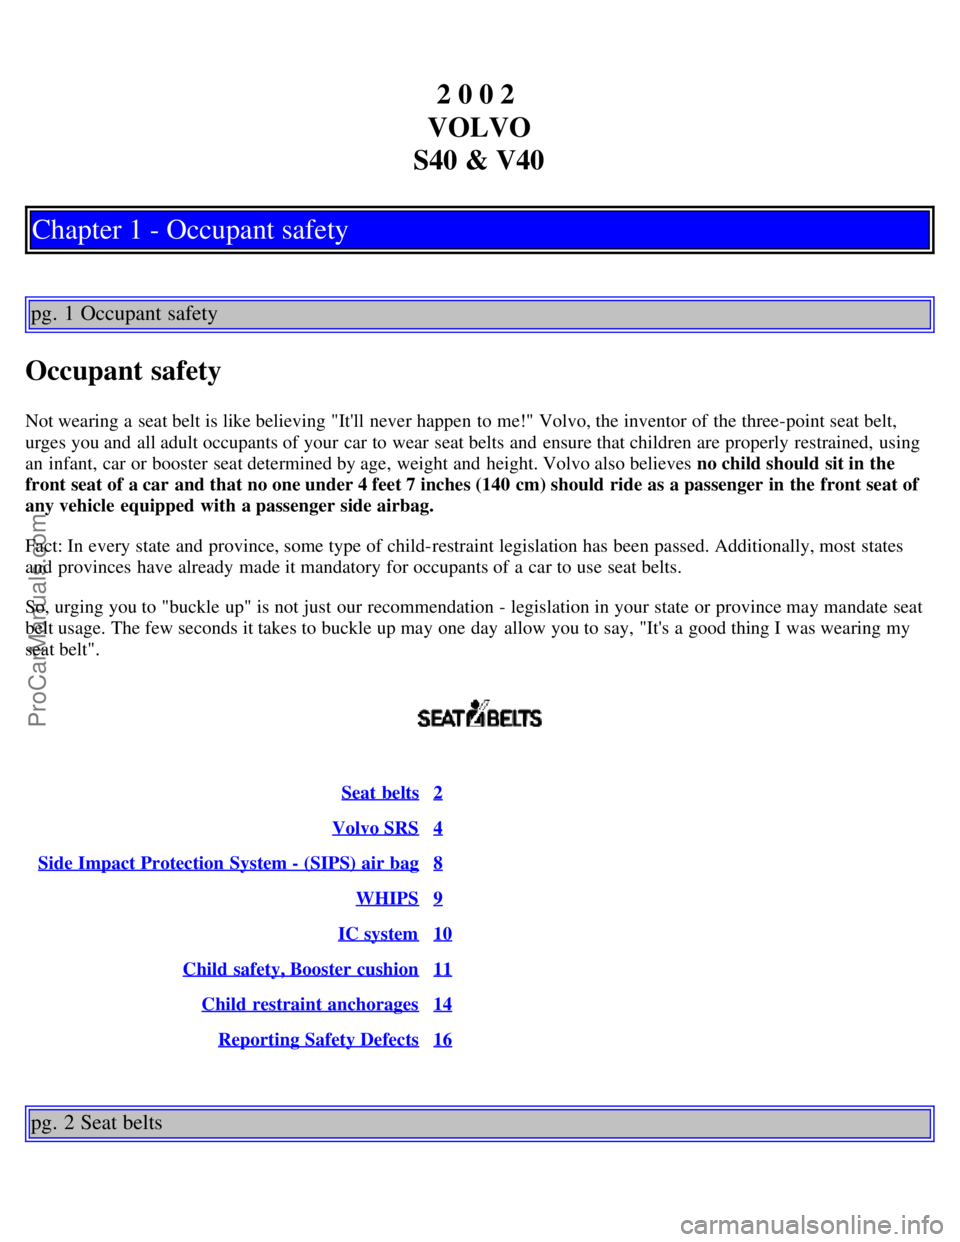 VOLVO V4 2002  Owners Manual 2 0 0 2 
VOLVO
S40 & V40
Chapter 1 - Occupant safety
pg. 1 Occupant safety
Occupant safety
Not wearing a  seat belt is like believing "Itll  never happen to me!" Volvo, the inventor of the three-poin